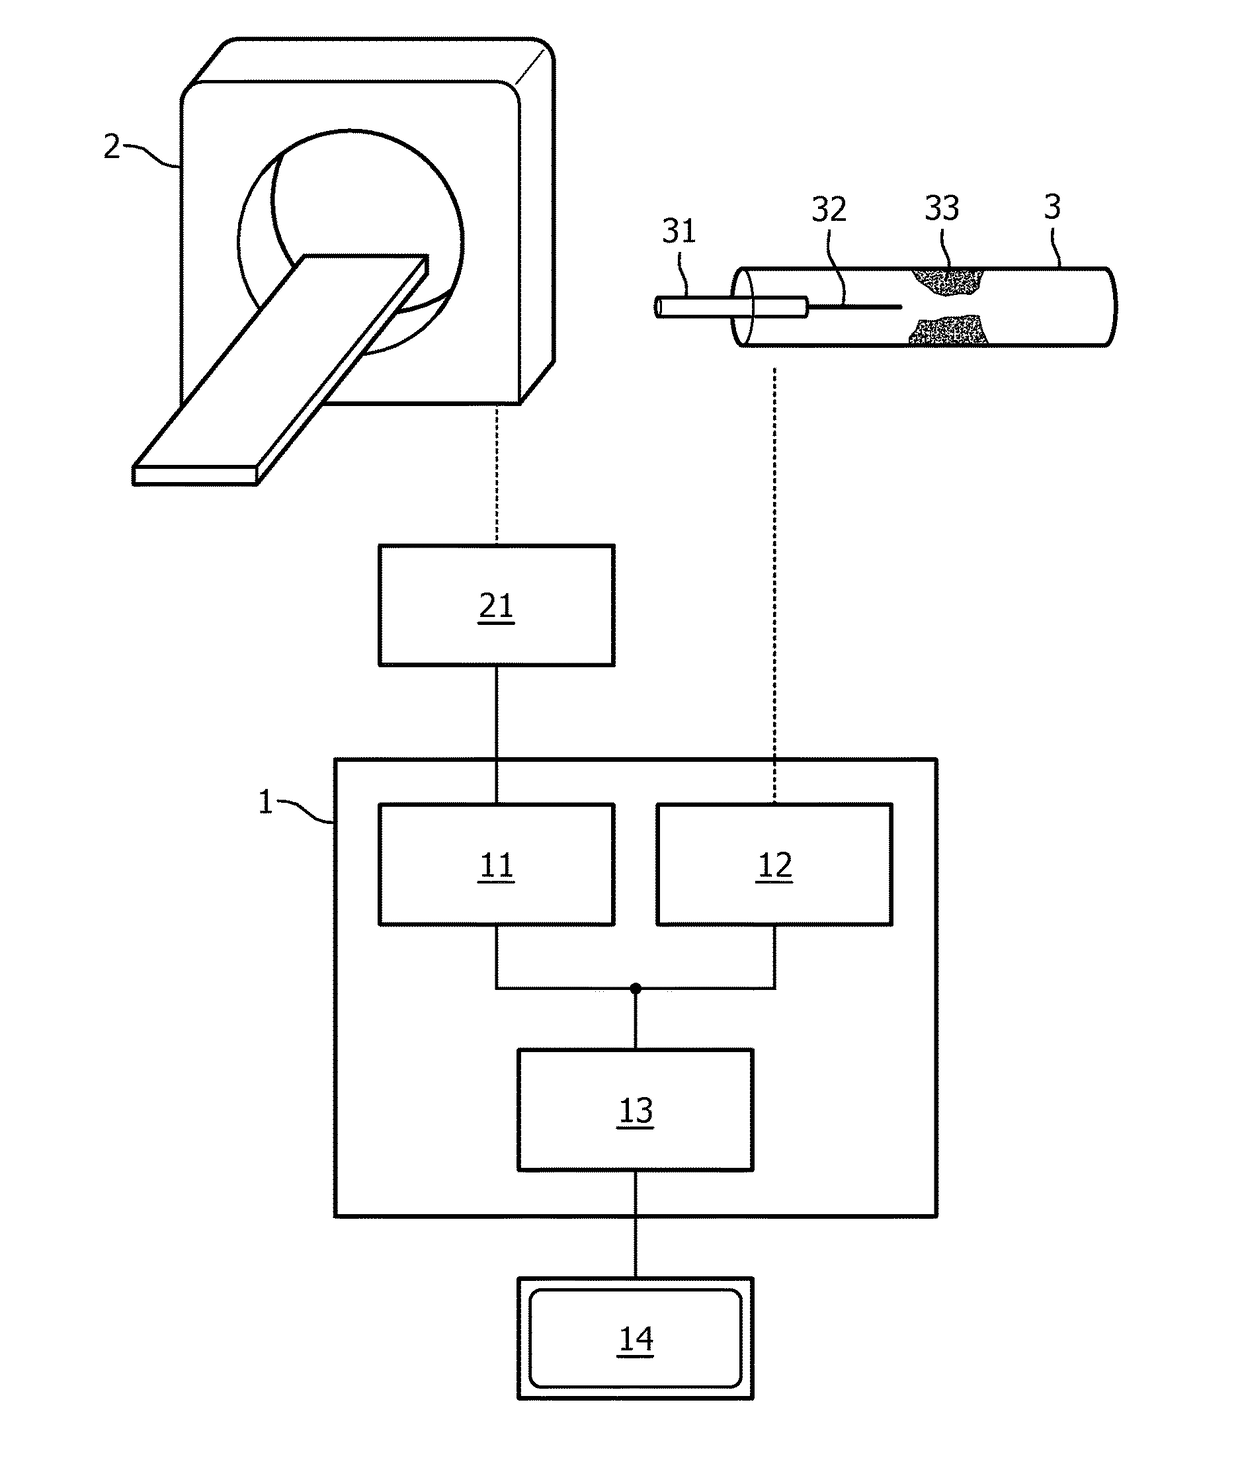 Processing apparatus and method for processing cardiac data of a living being